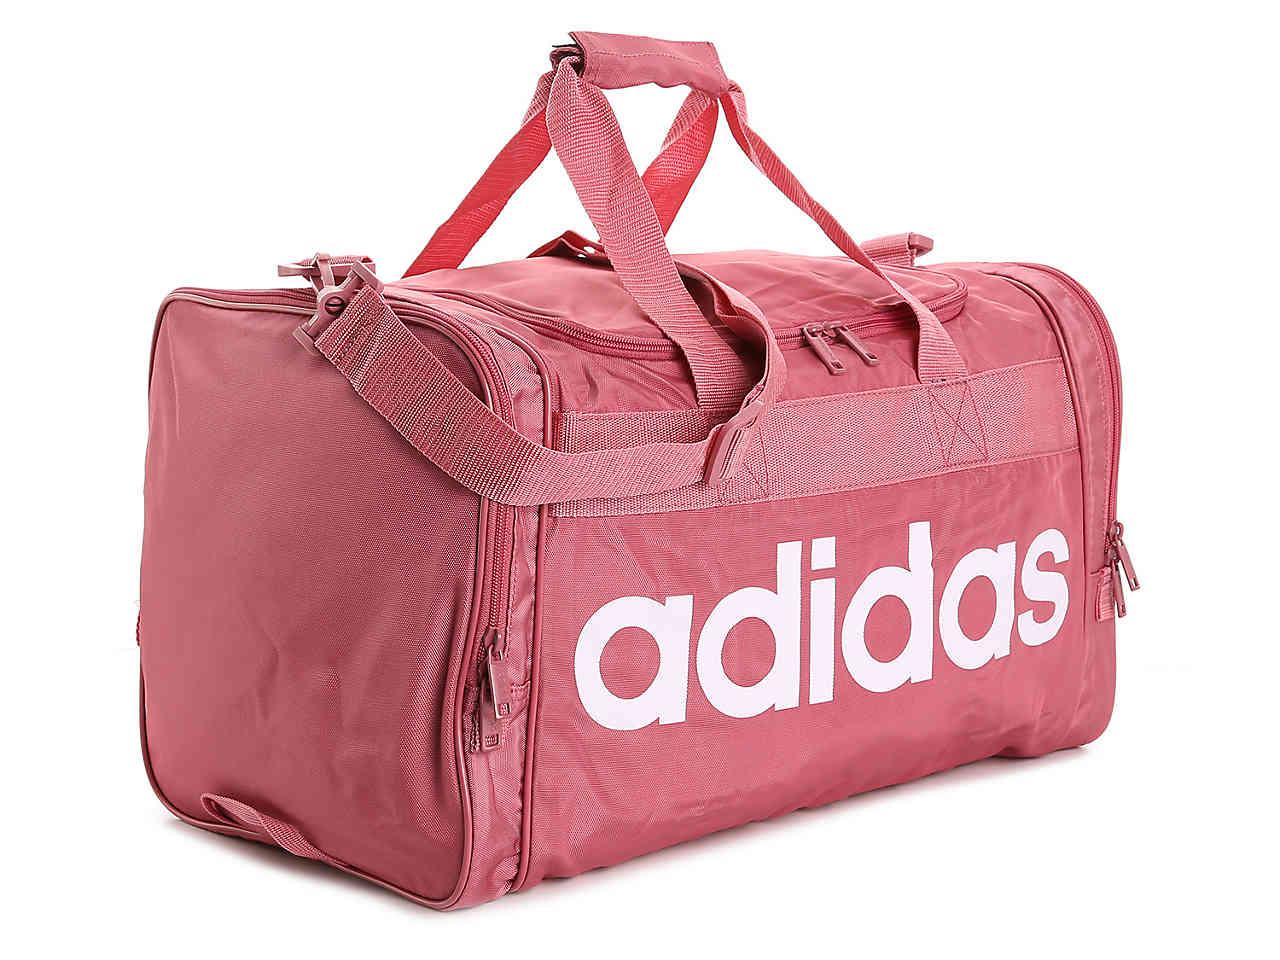 adidas Synthetic Santiago Gym Bag in Burgundy Pink (Pink) | Lyst